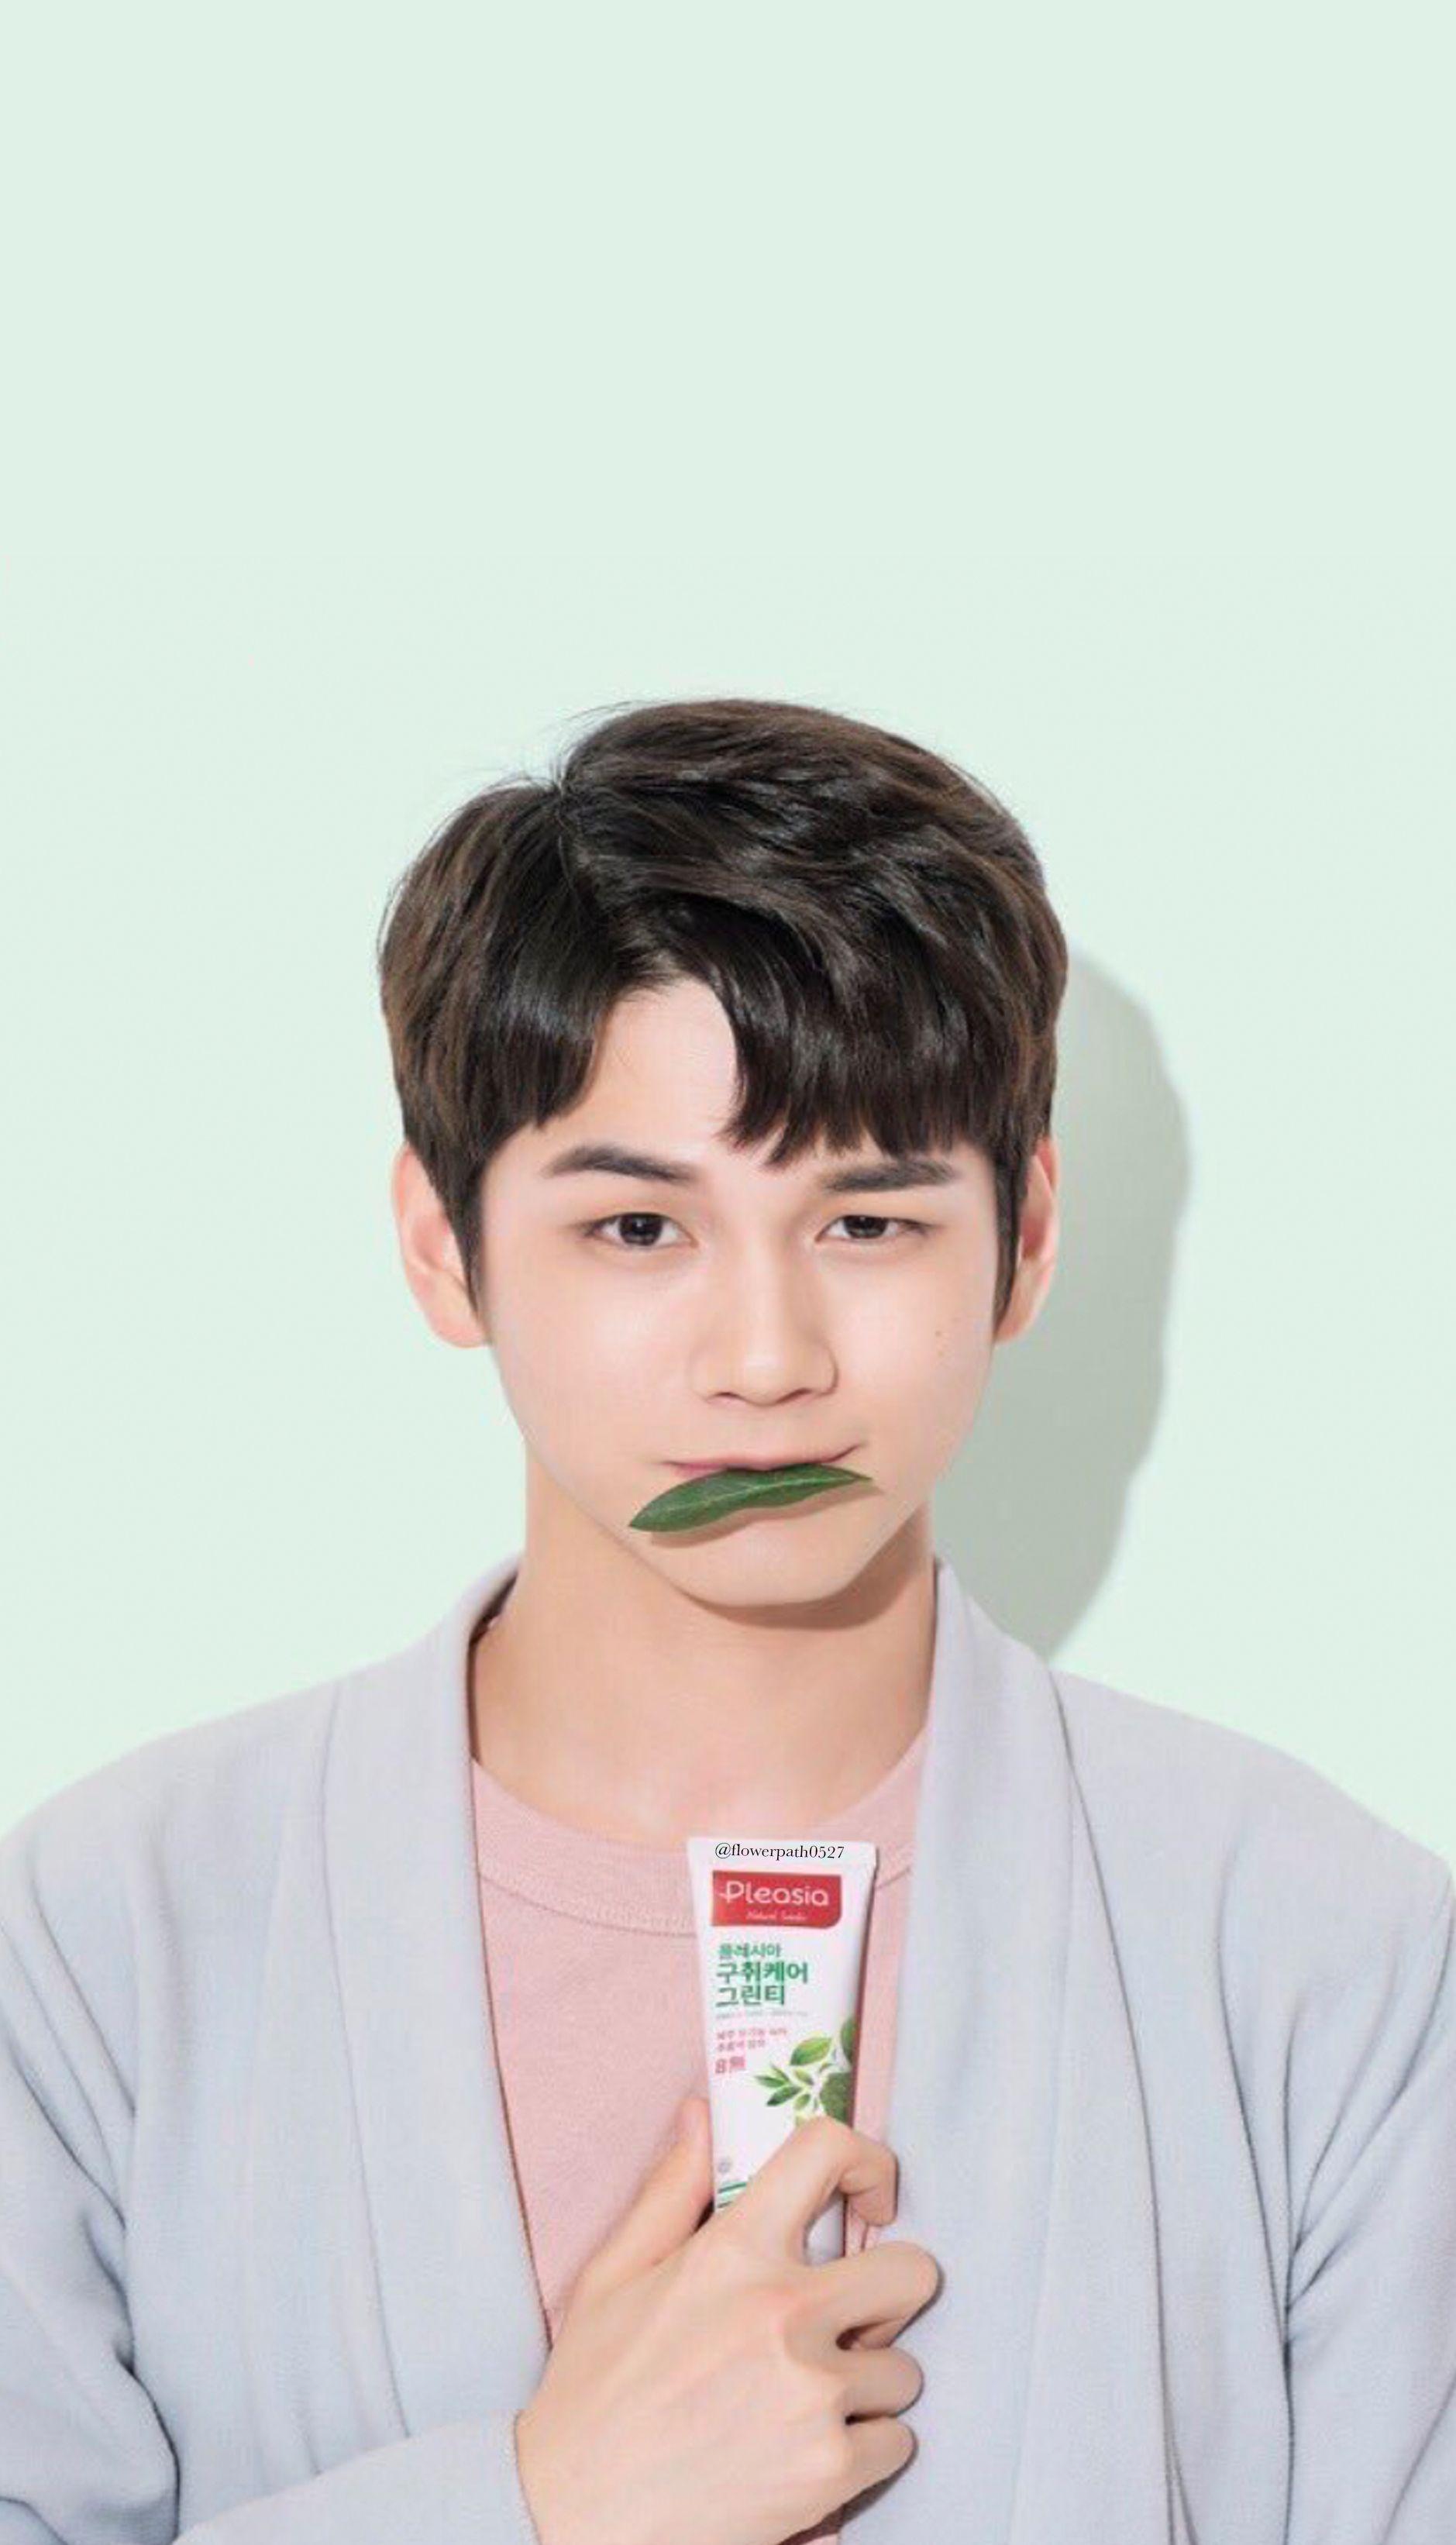 Wanna One x Pleasia Toothpaste Ong Seongwu Wallpaper. About Wanna One